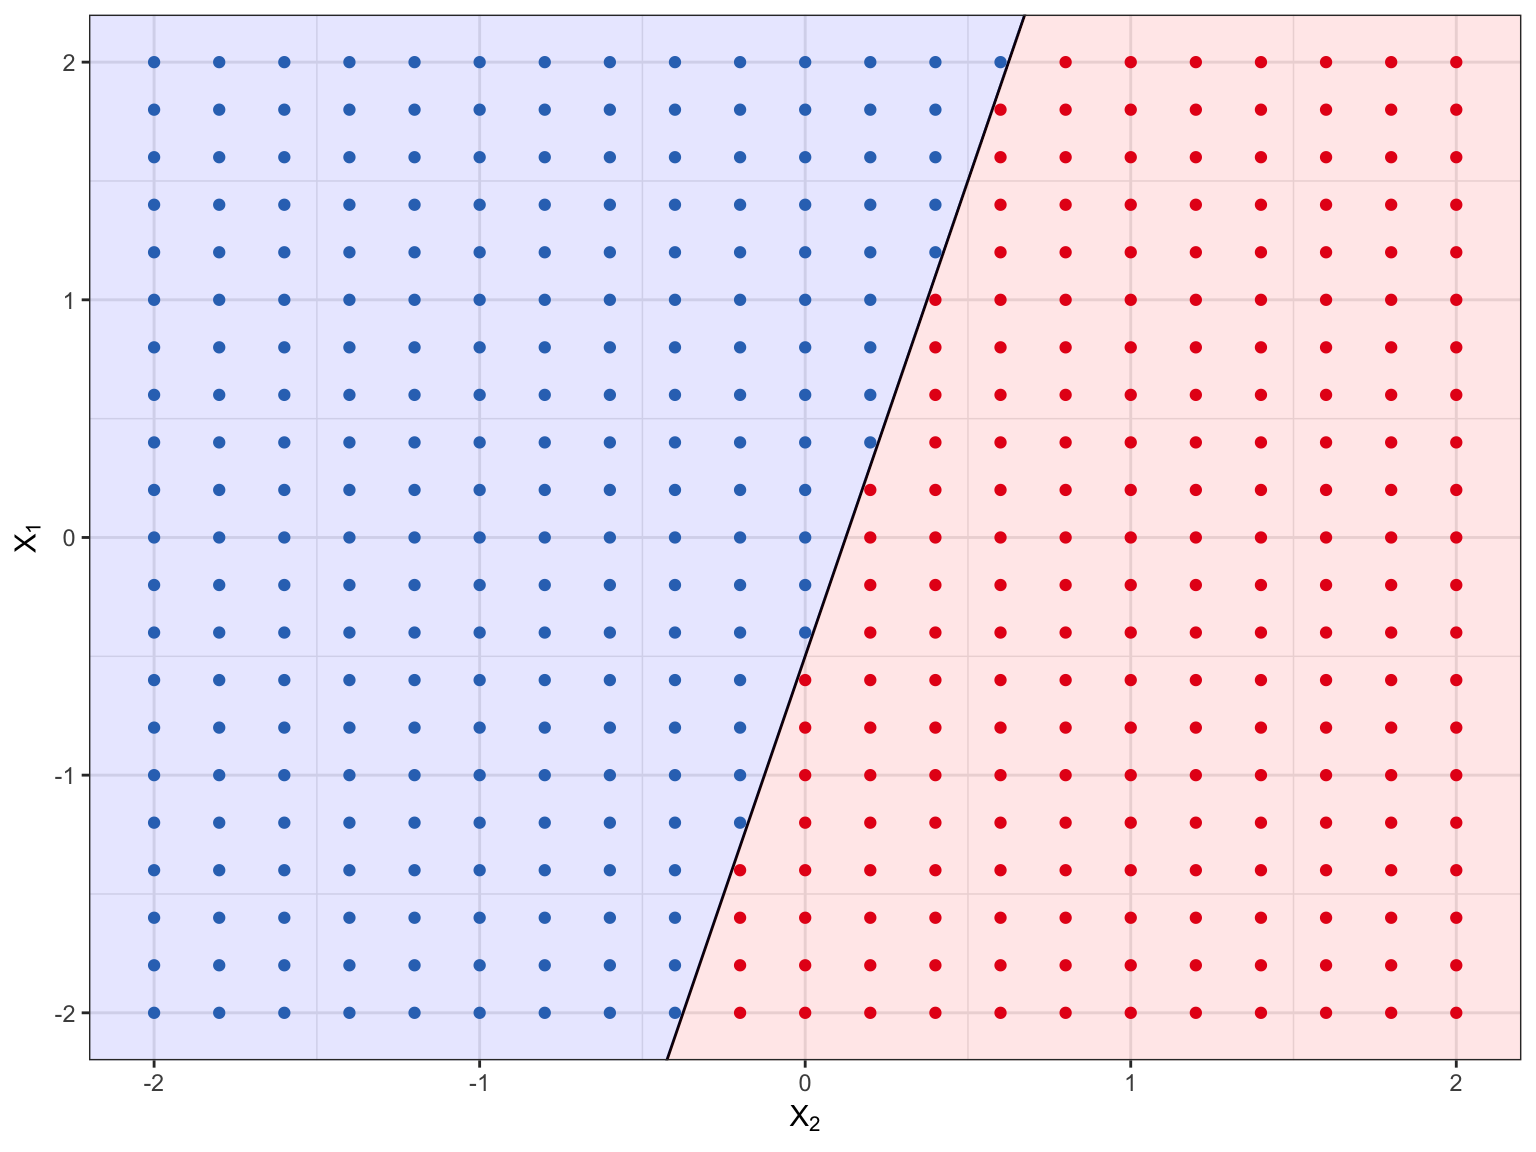 The hyperplane, $.5 + 1X_1 + -4X_2 = 0$, is black line, the red points occur in the region where $.5 + 1X_1 + -4X_2 > 0$, while the blue points occur in the region where $.5 + 1X_1 + -4X_2 < 0$.